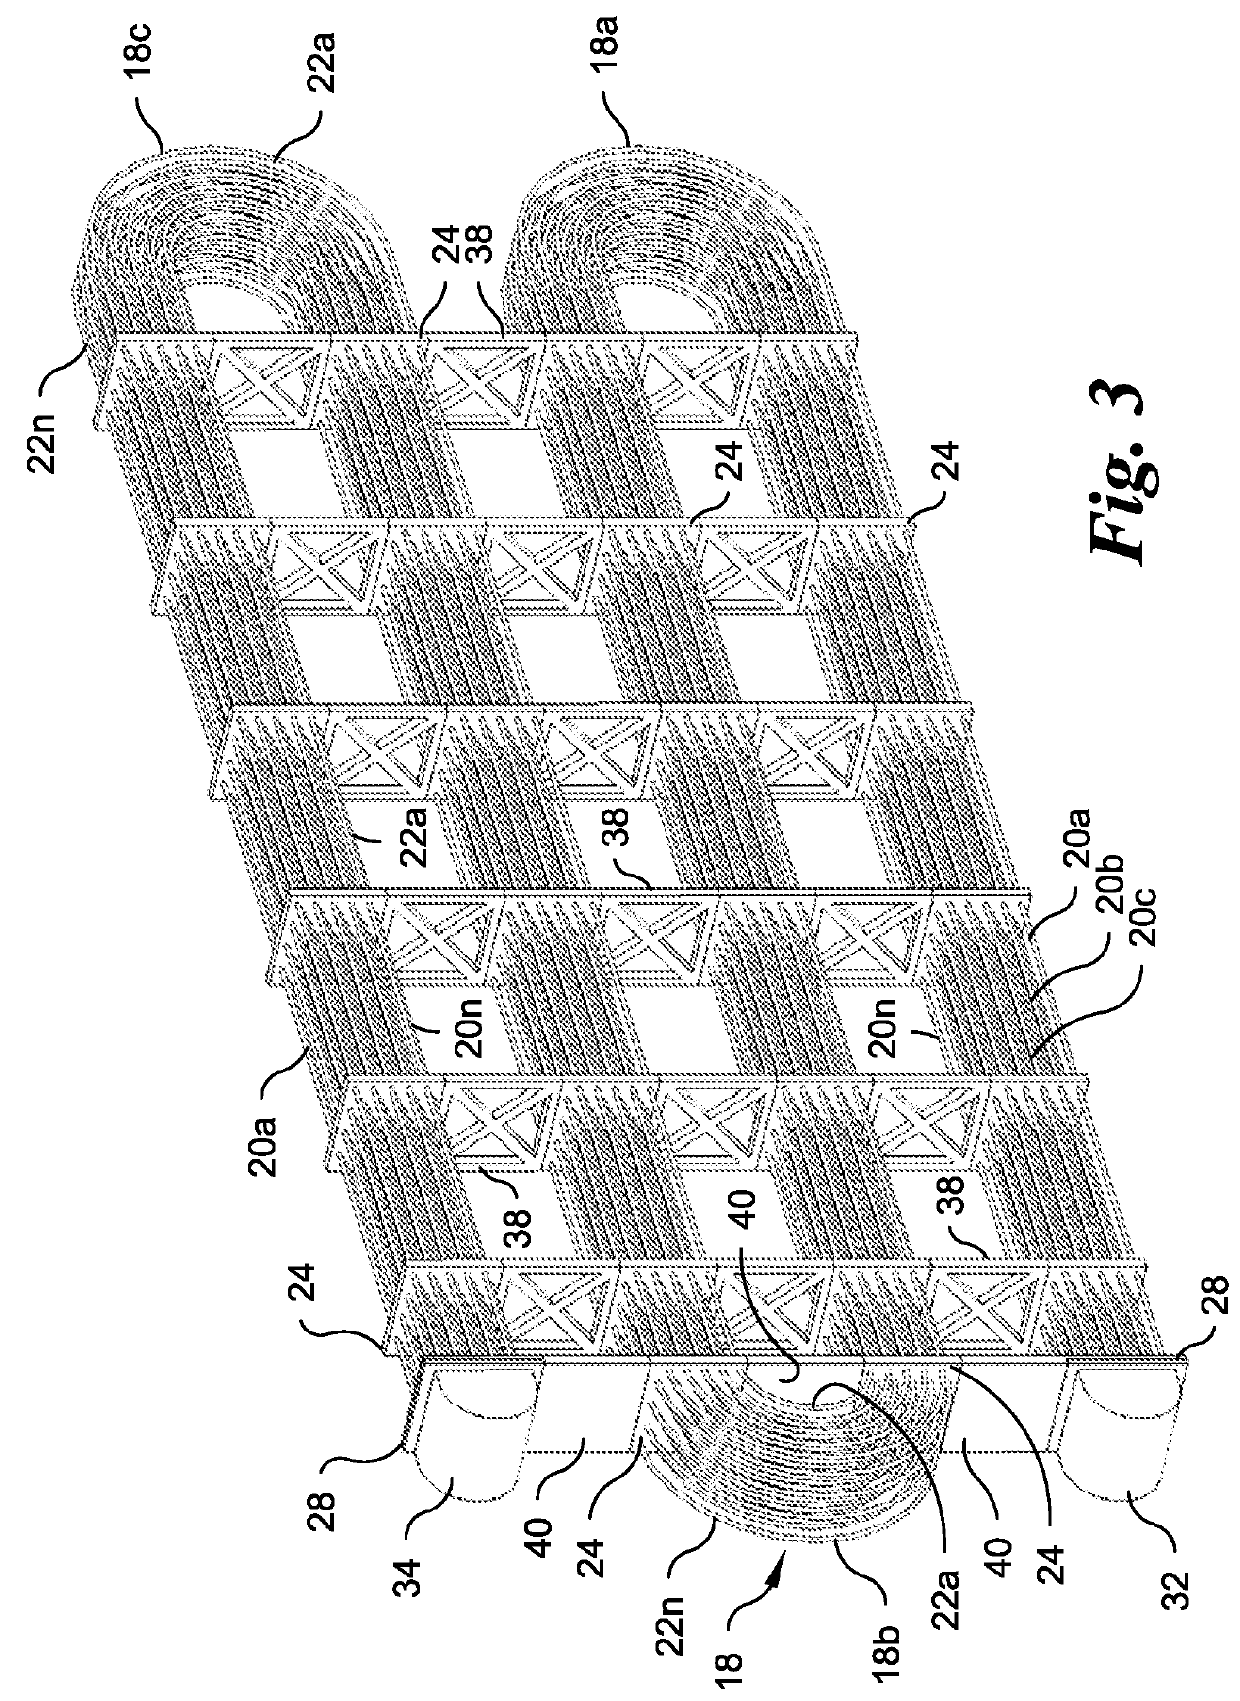 Polymeric coil assembly and method of making the same